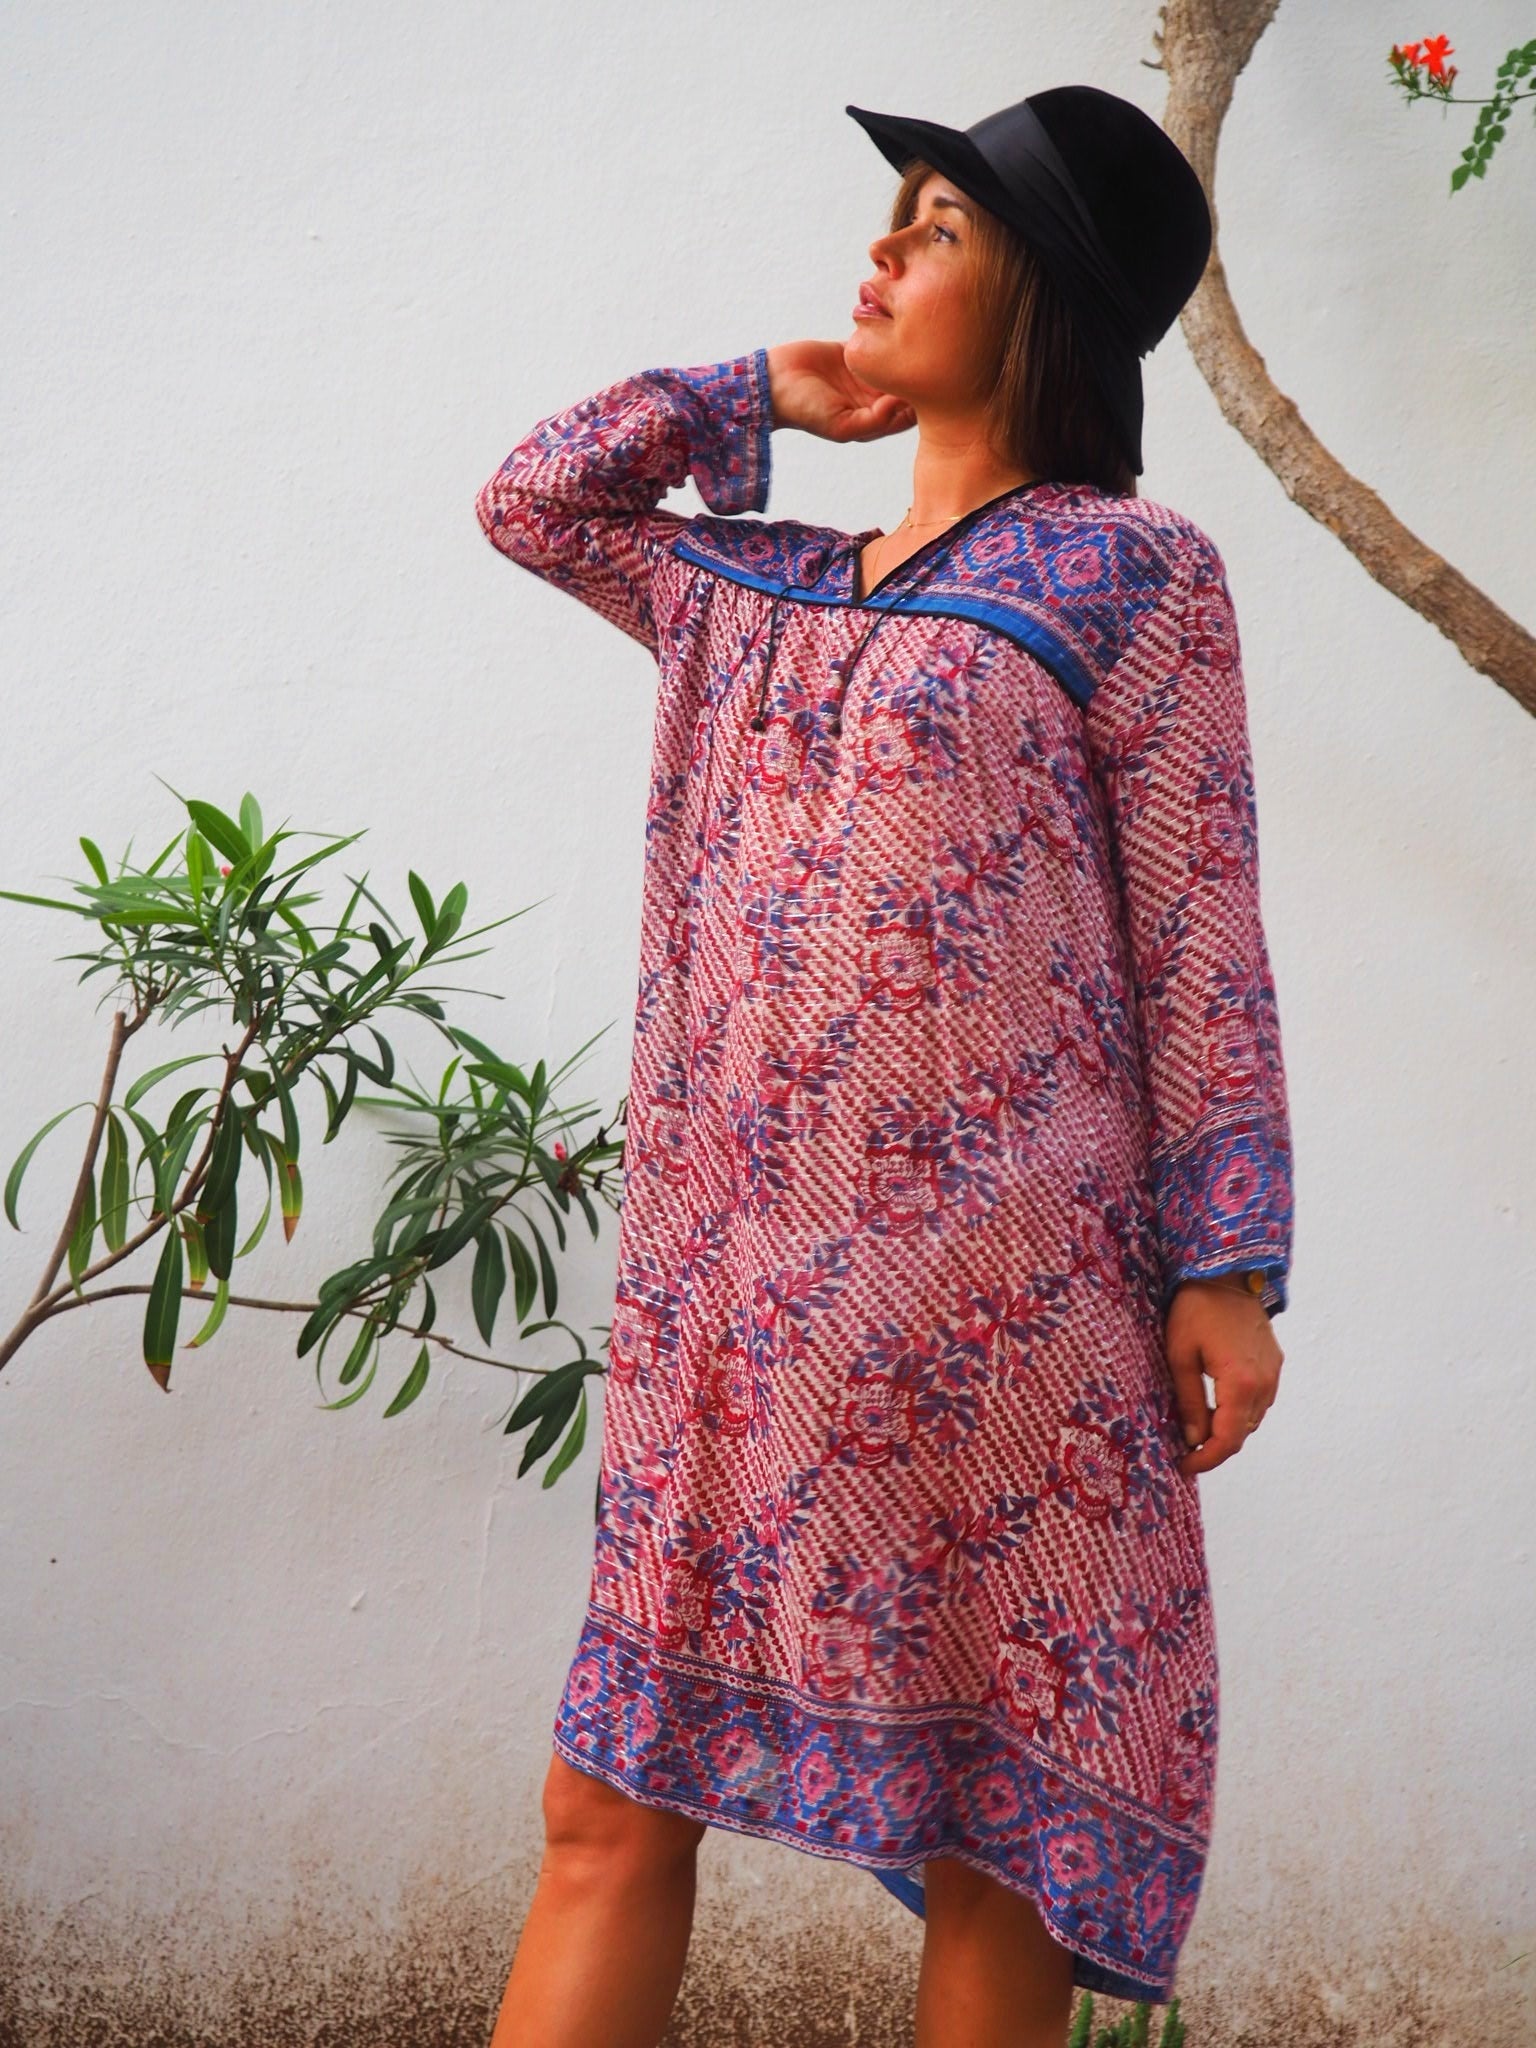 White Mughal 'Marvel' Hand Block Printed Cotton Dress – The Ethnic Label